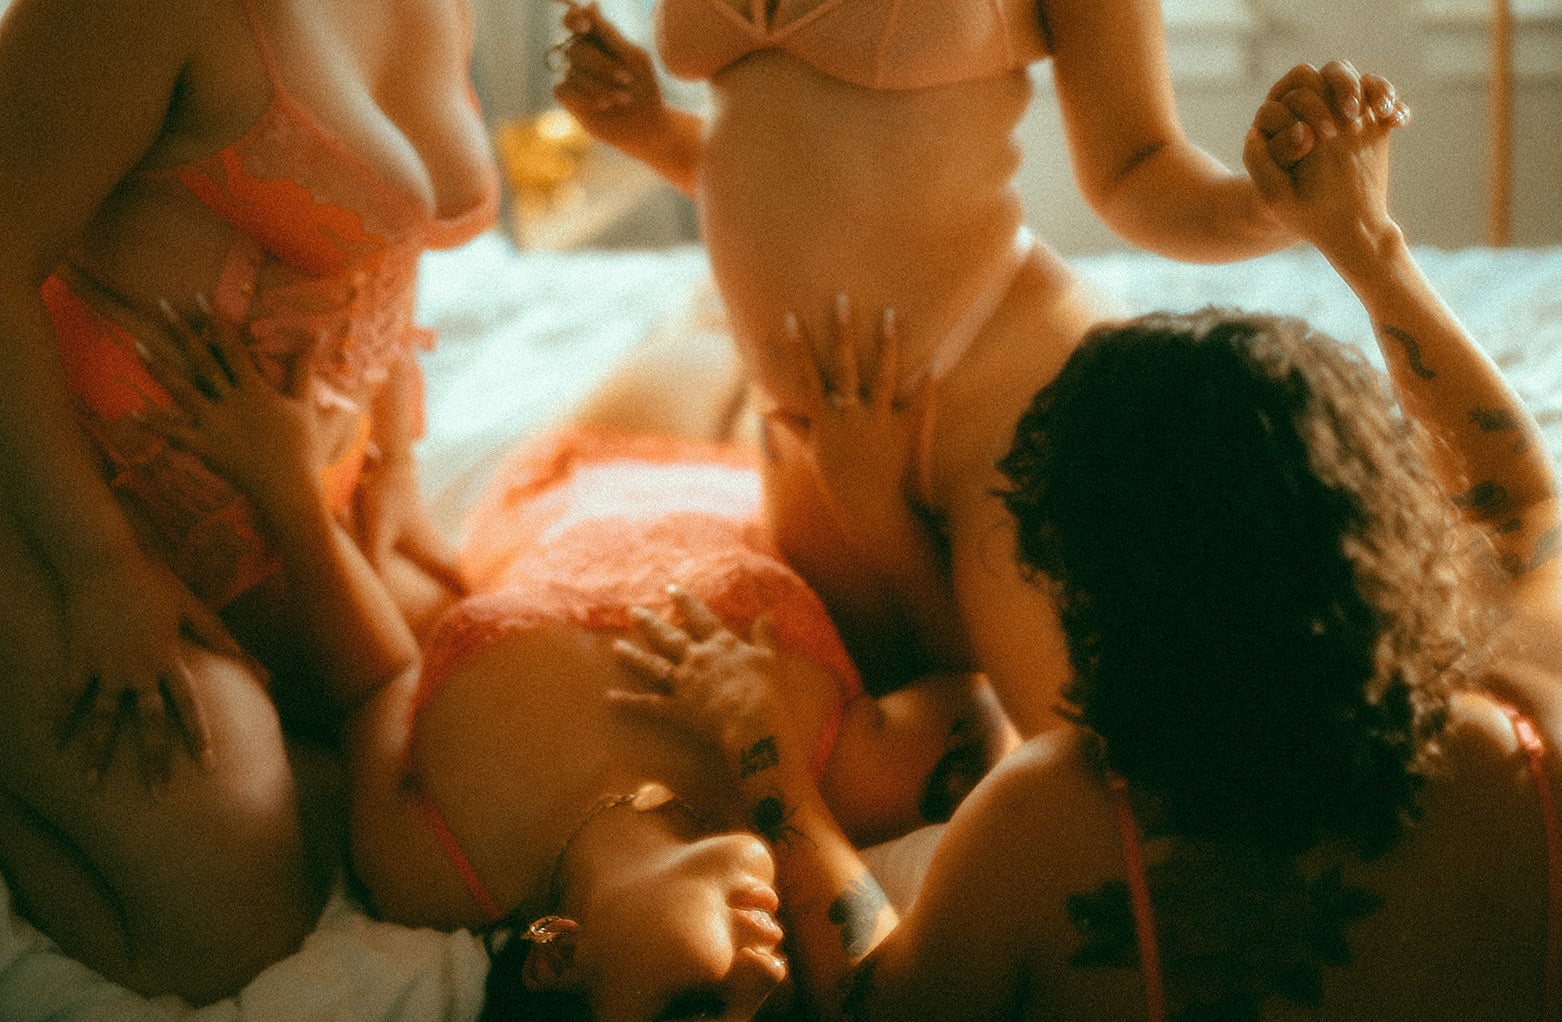 Multiple women being intimate